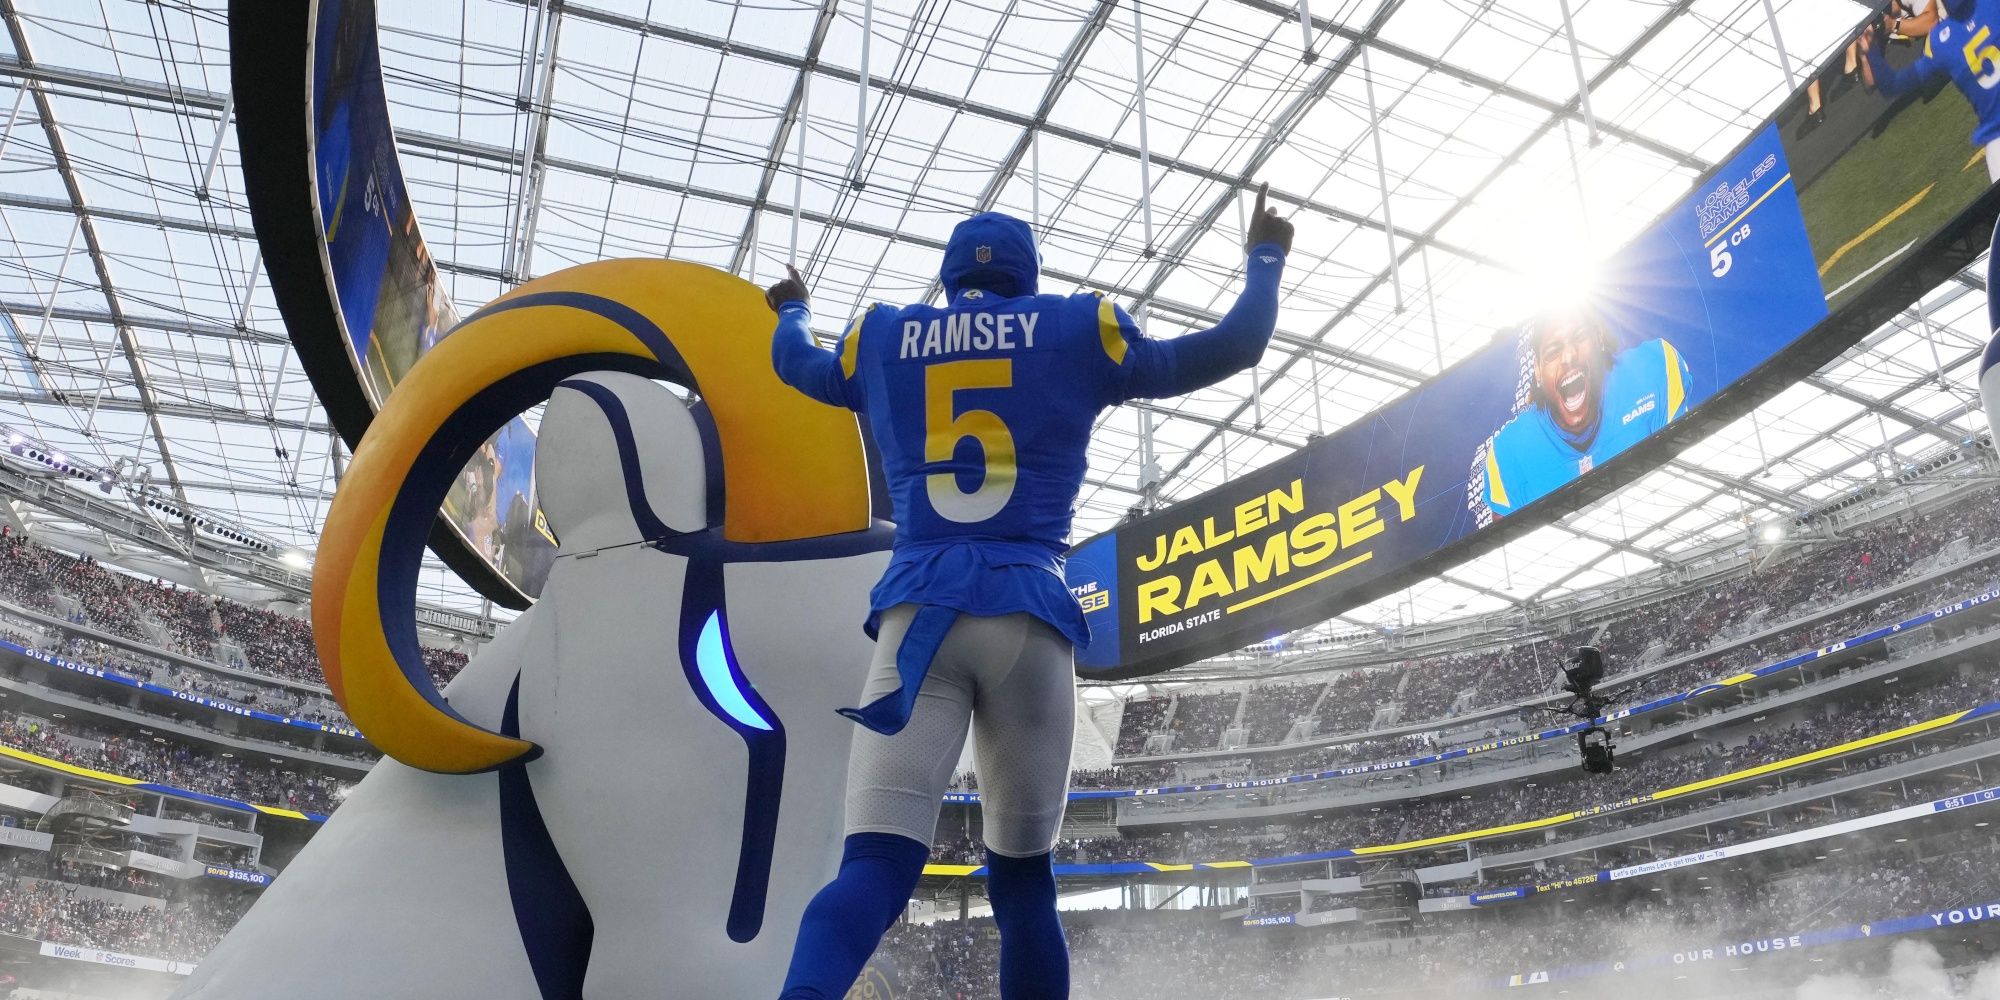 Jalen Ramsey making his entrance at a Rams game in a blue uniform. His name is displayed above him on a giant stadium wrap around video wall